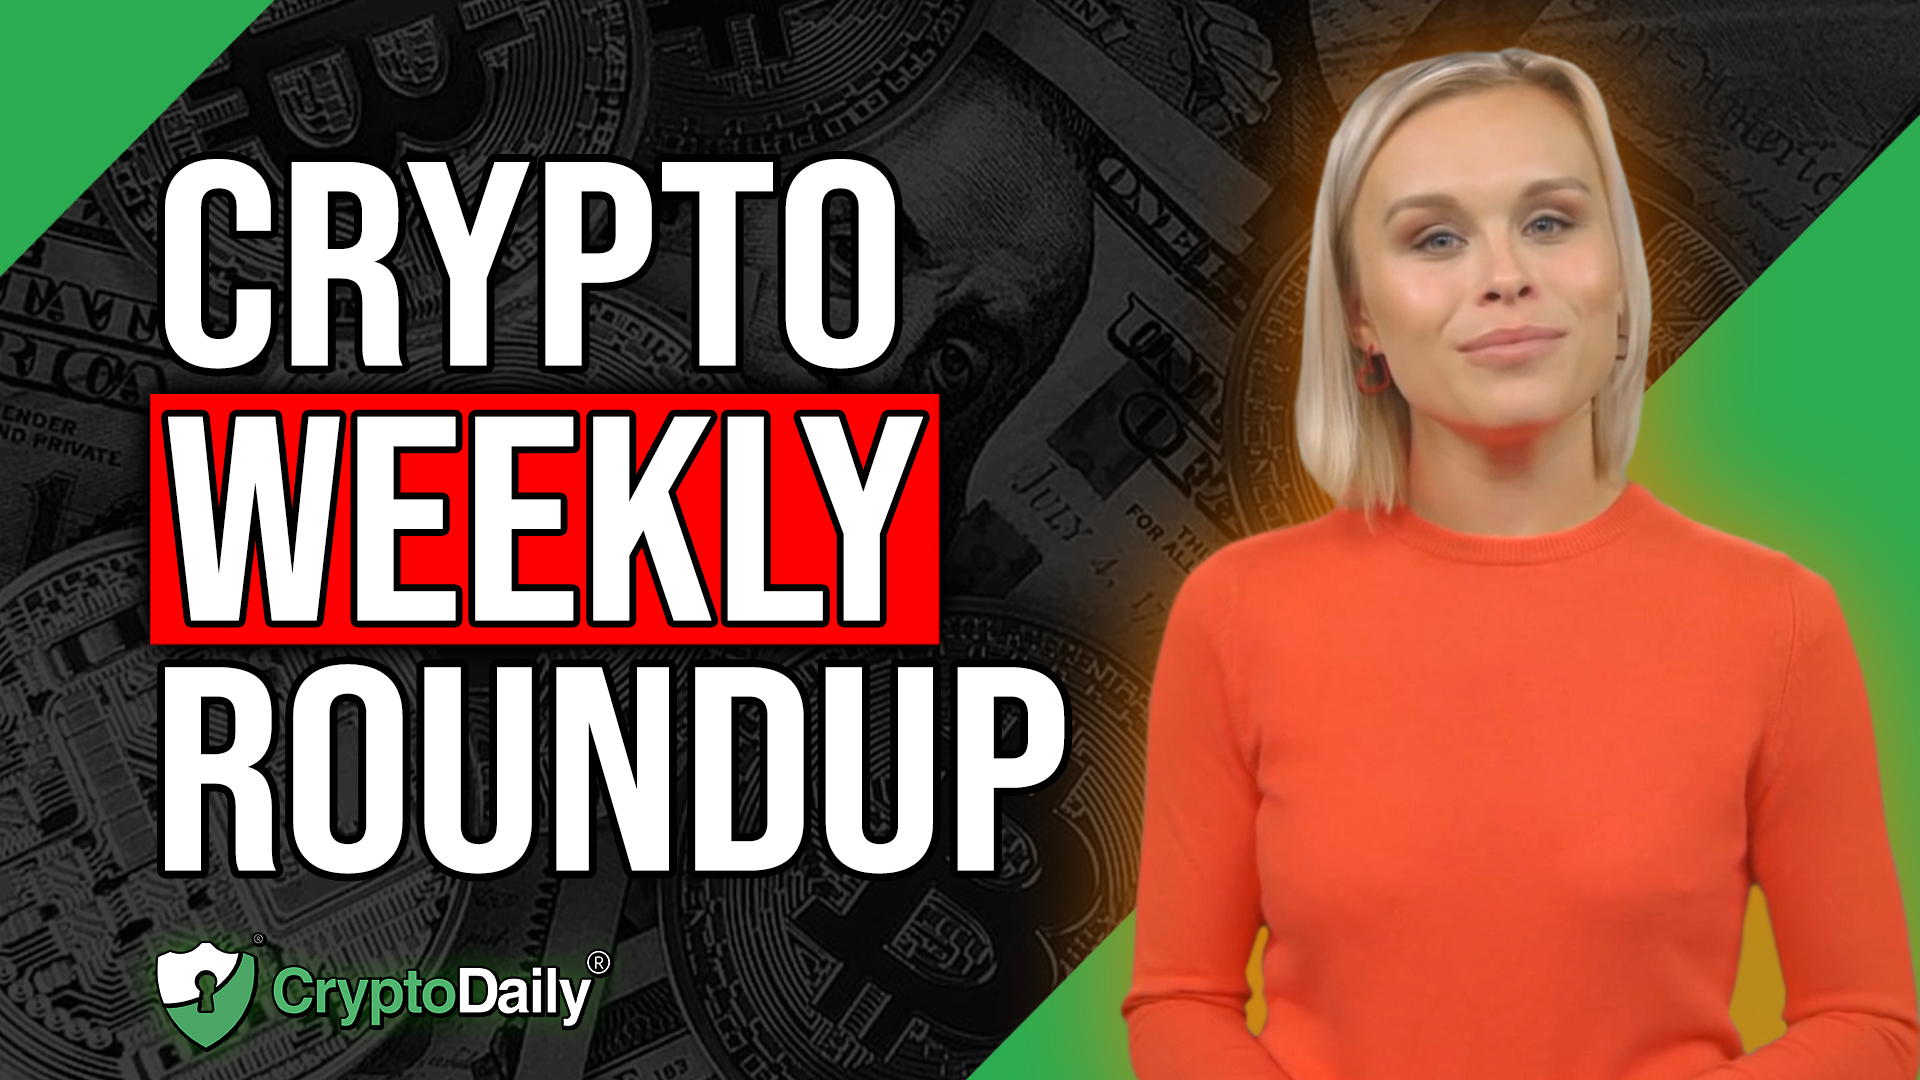 Crypto Weekly Roundup: “Didn’t Steal Funds,” Says SBF And More